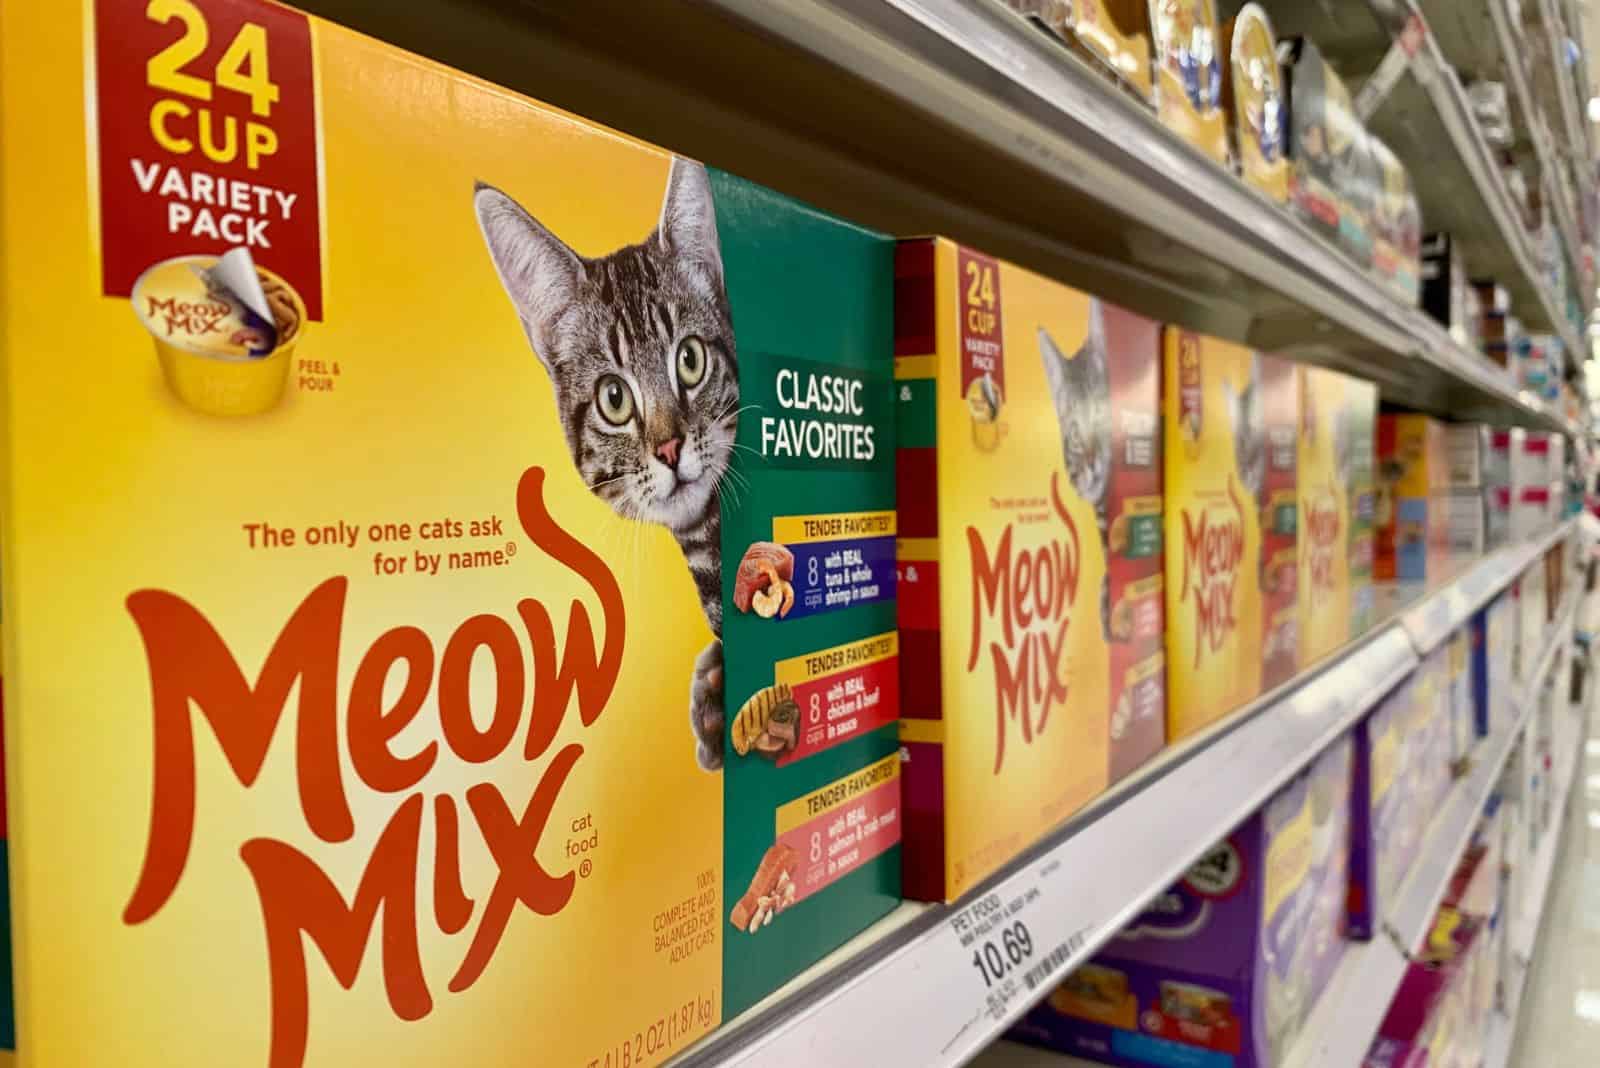 Meow Mix in boxes on the shelf